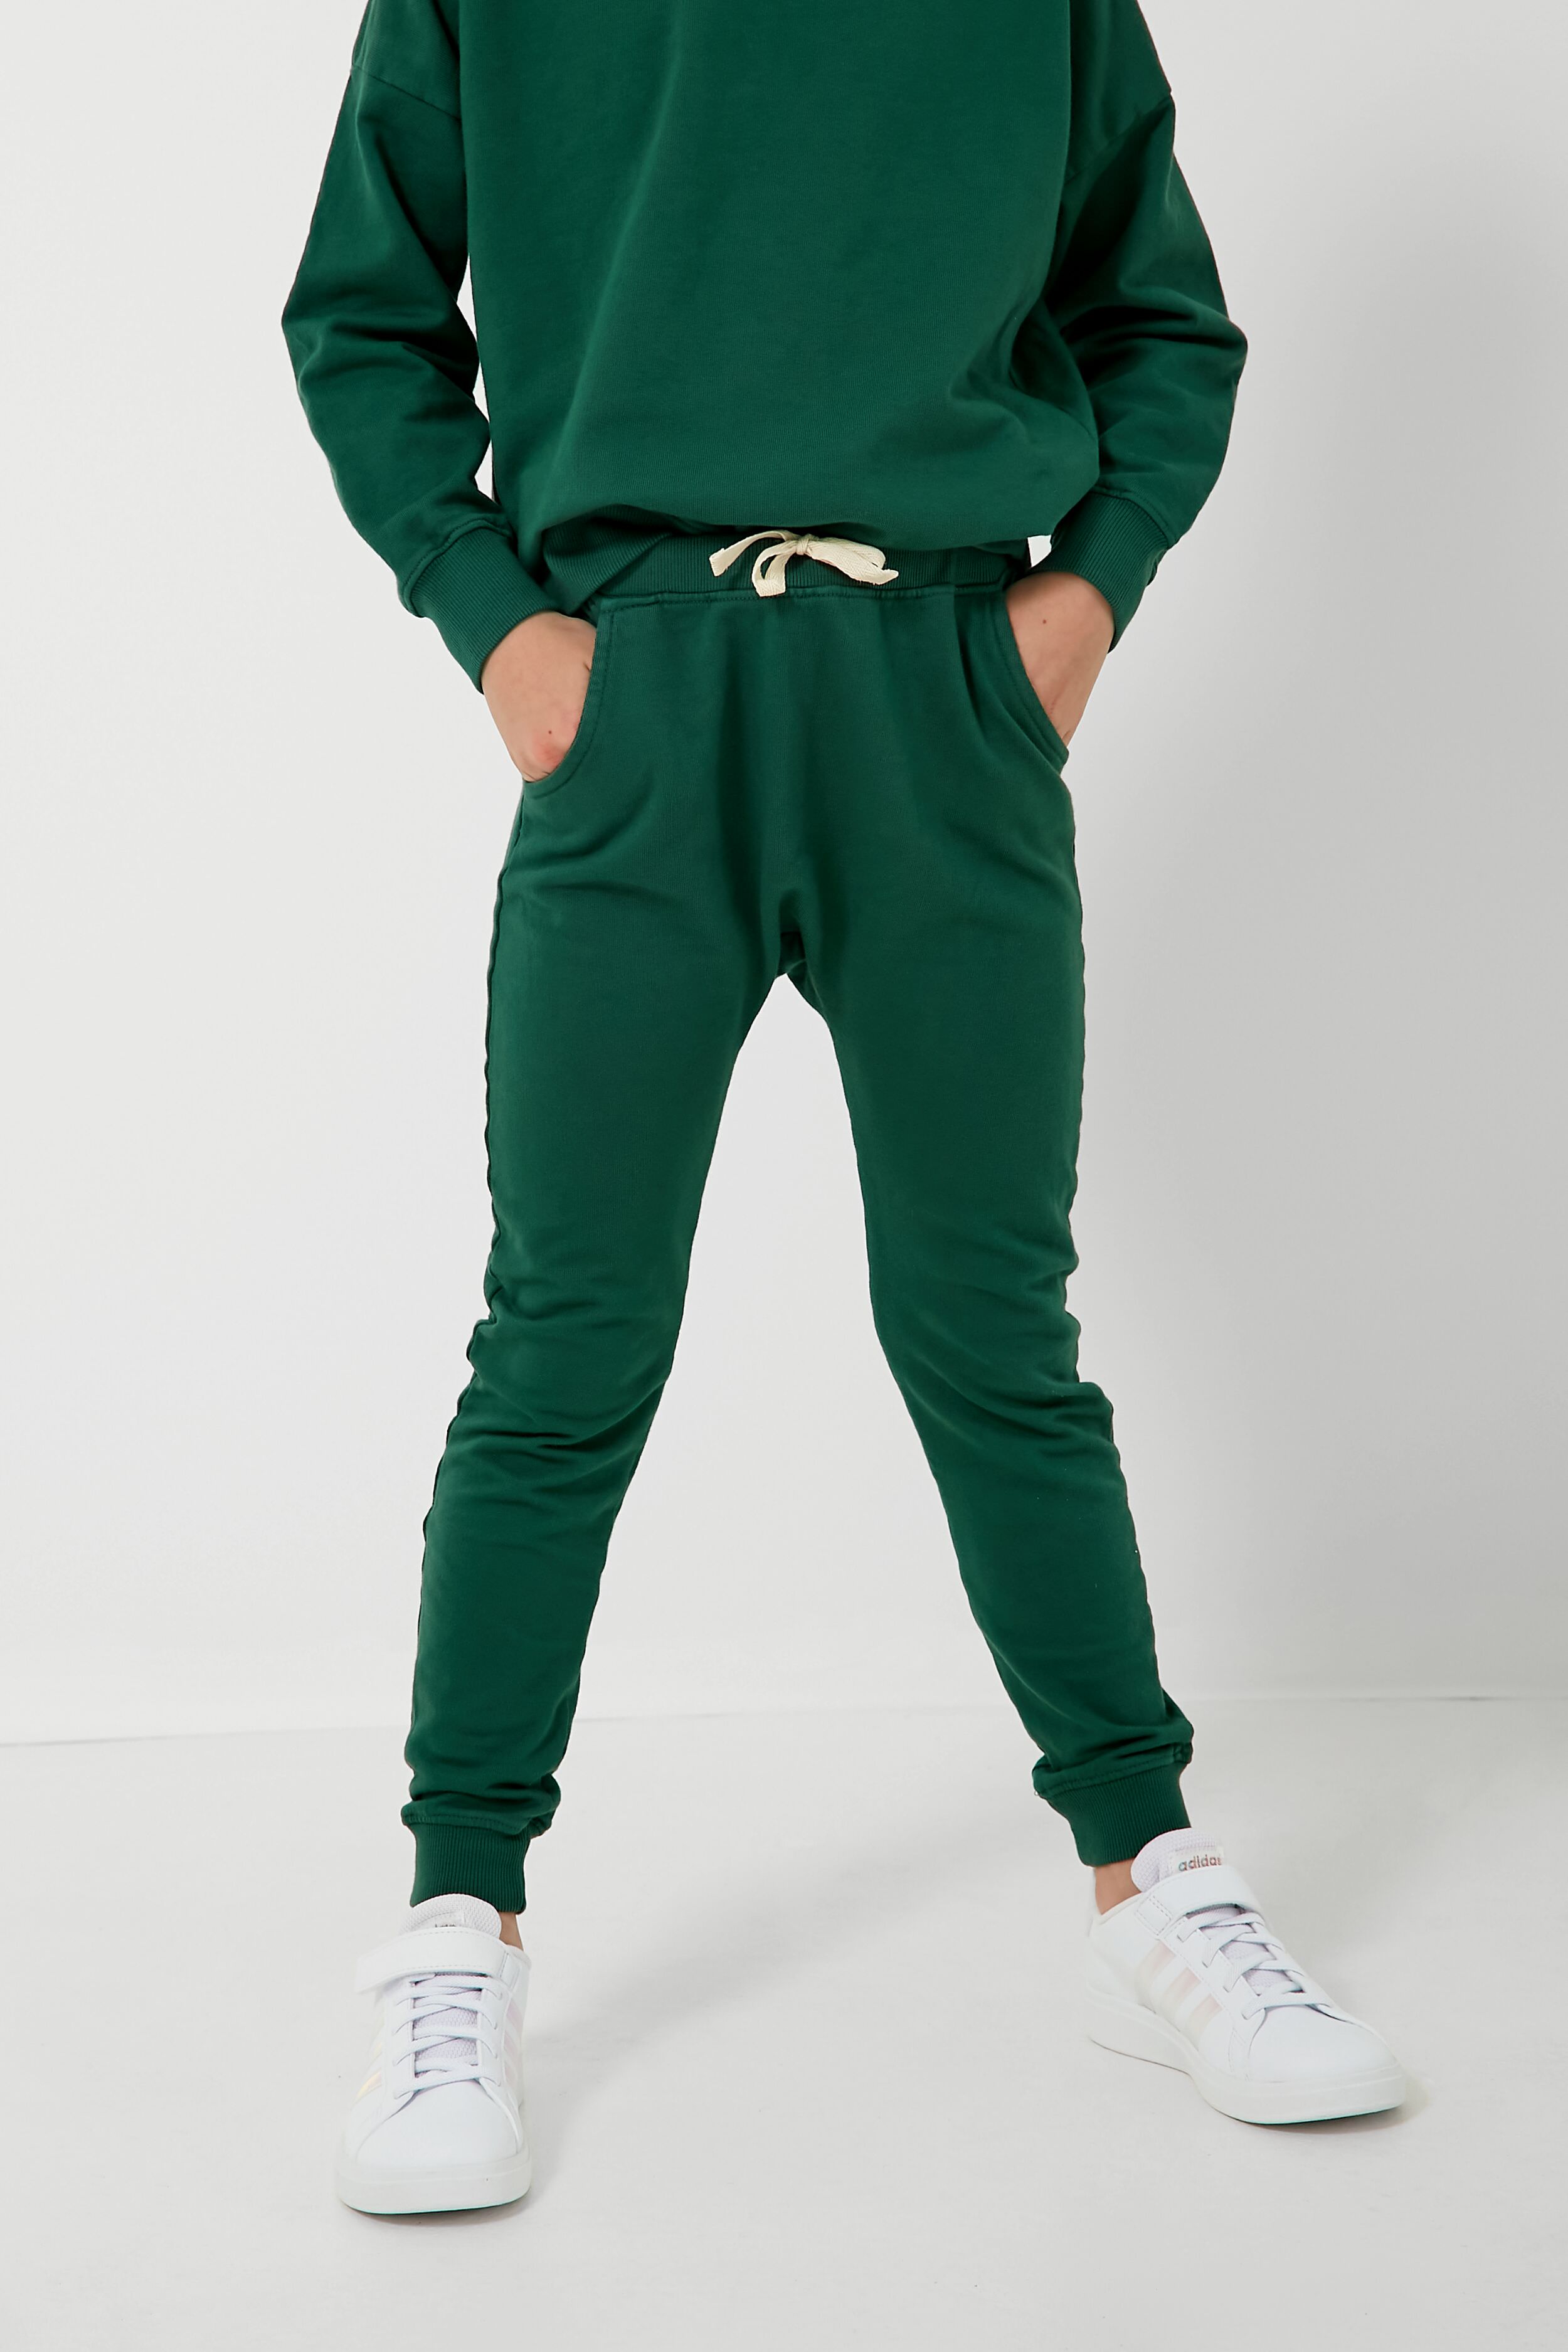 The Velour Tracksuit: Dream of Doing Nothing